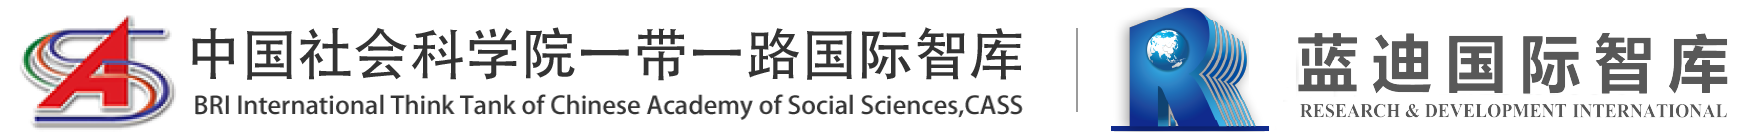 BRI International Think Tank of Chinese Academy of Social Sciences